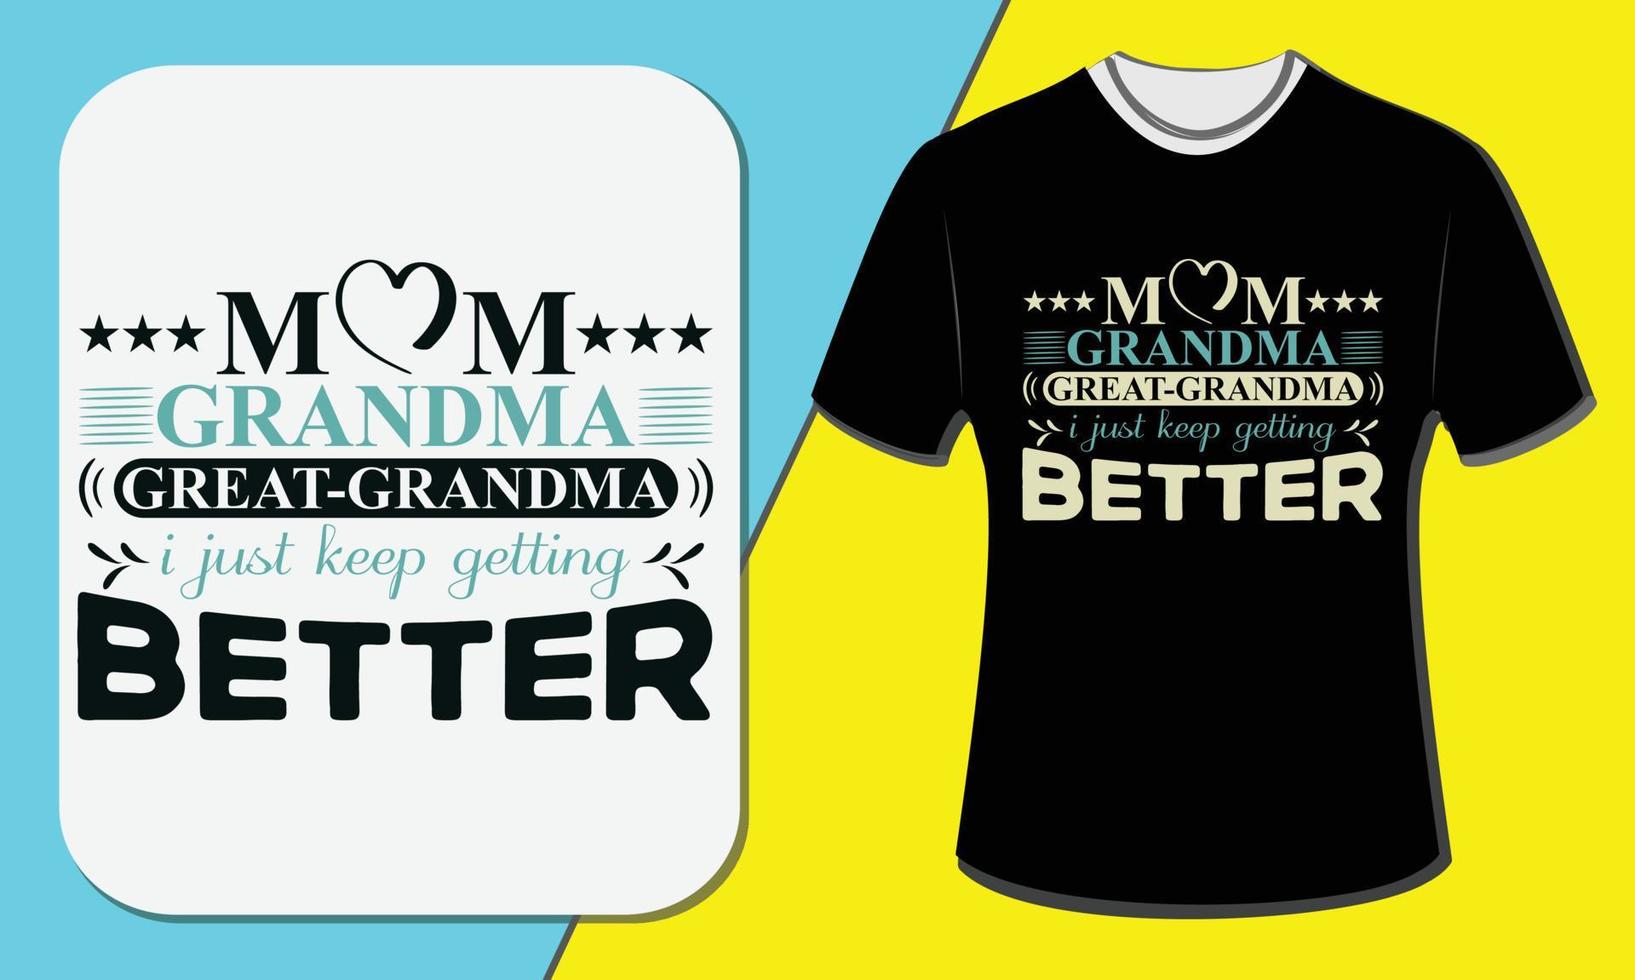 mama oma over oma ik word steeds beter, grootouders dag t-shirt design vector